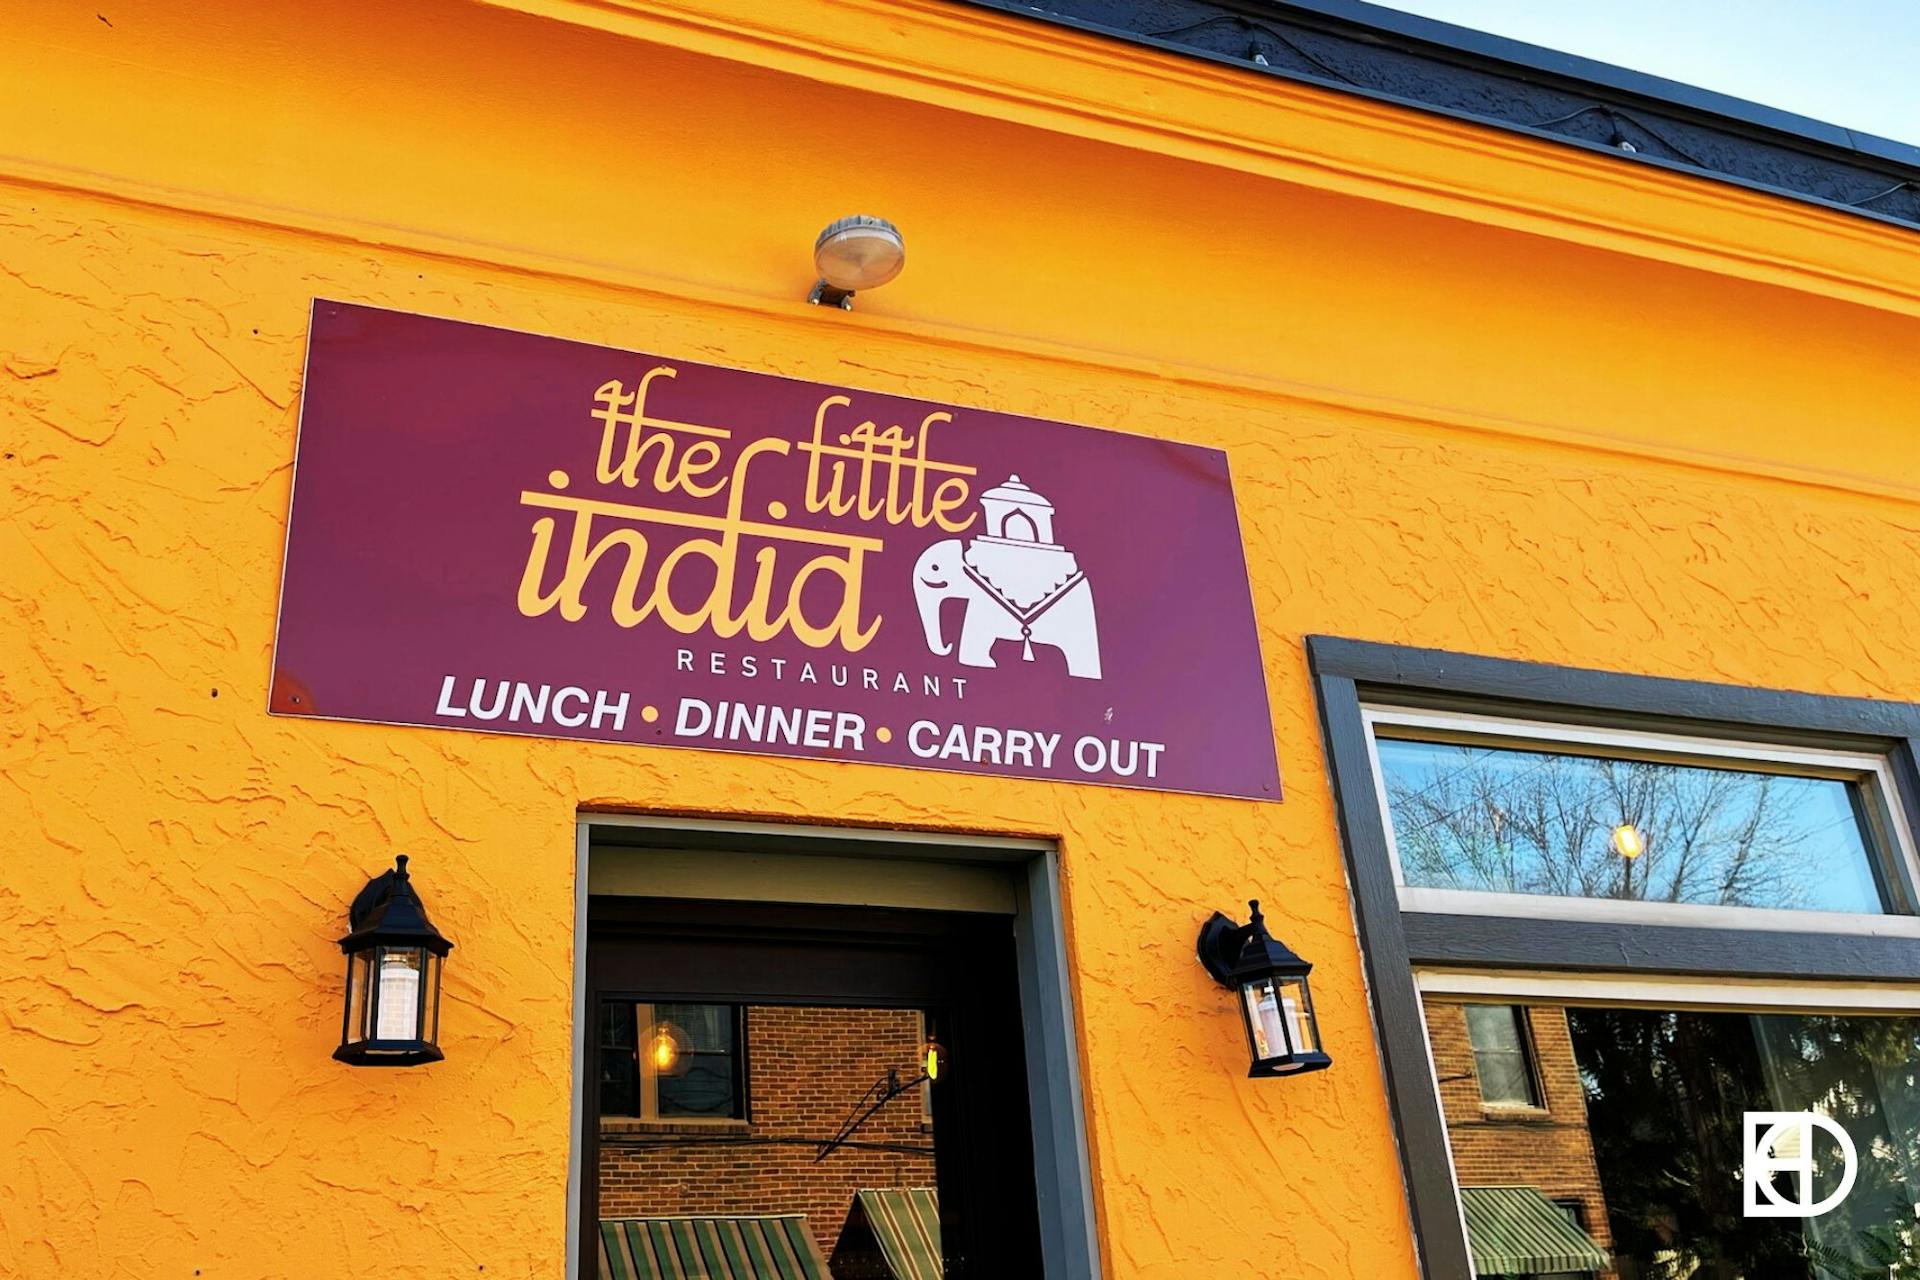 Photo of the signage at The Little India Restaurant